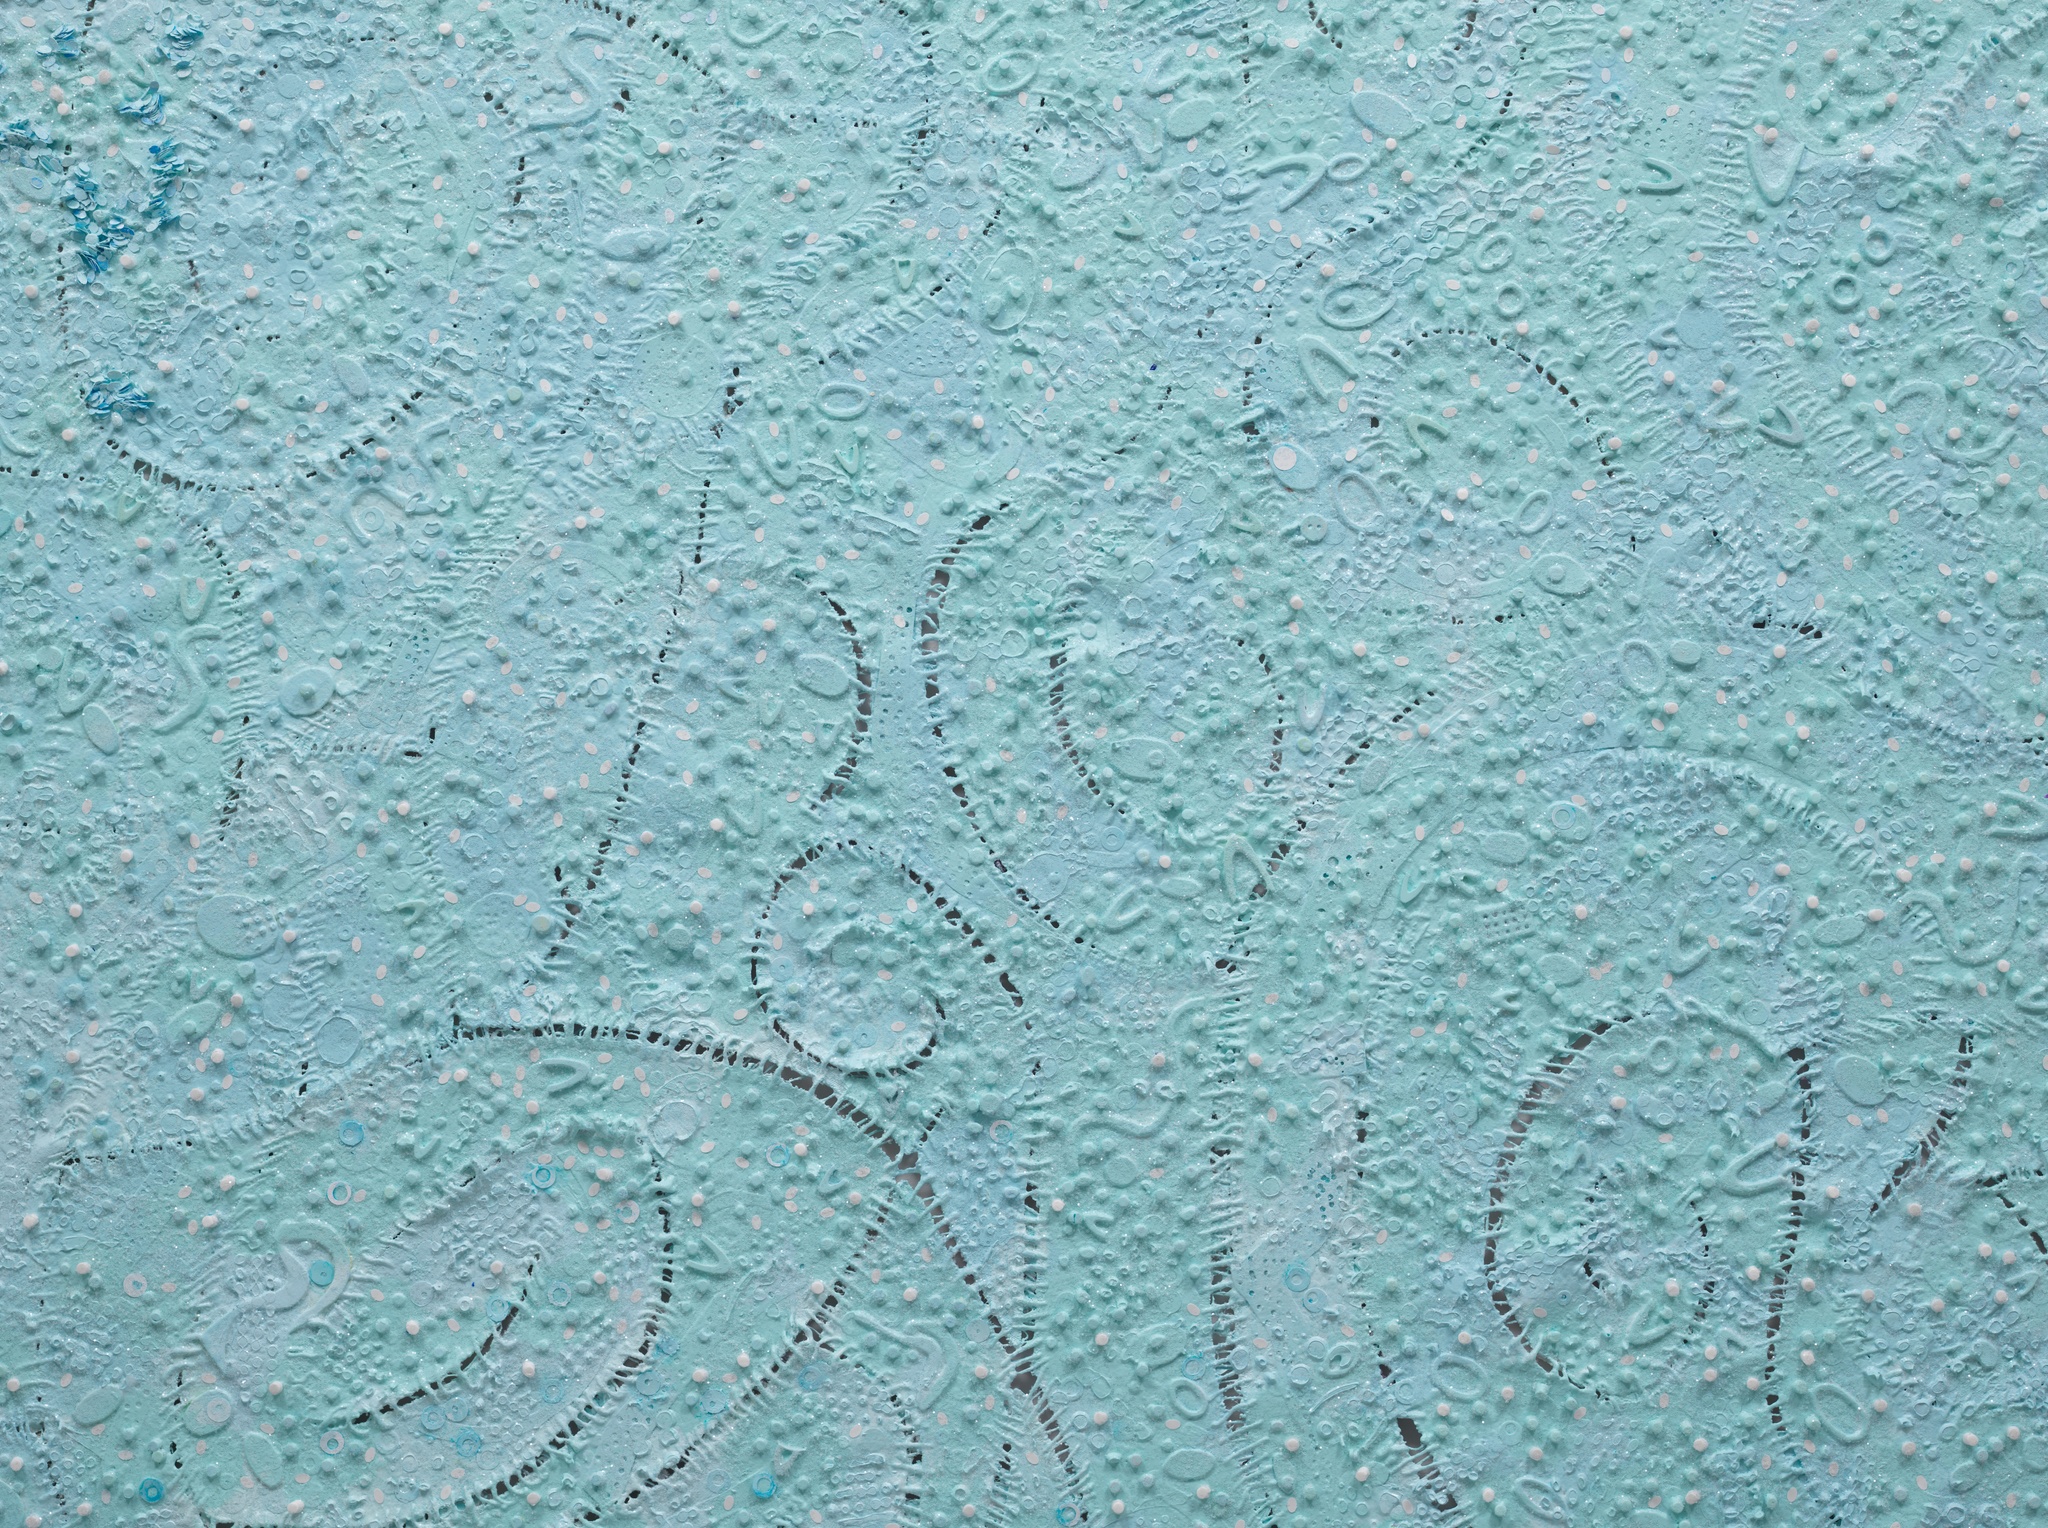 A close-up image of a blue-green abstract canvas with sutures and other elements on its surface